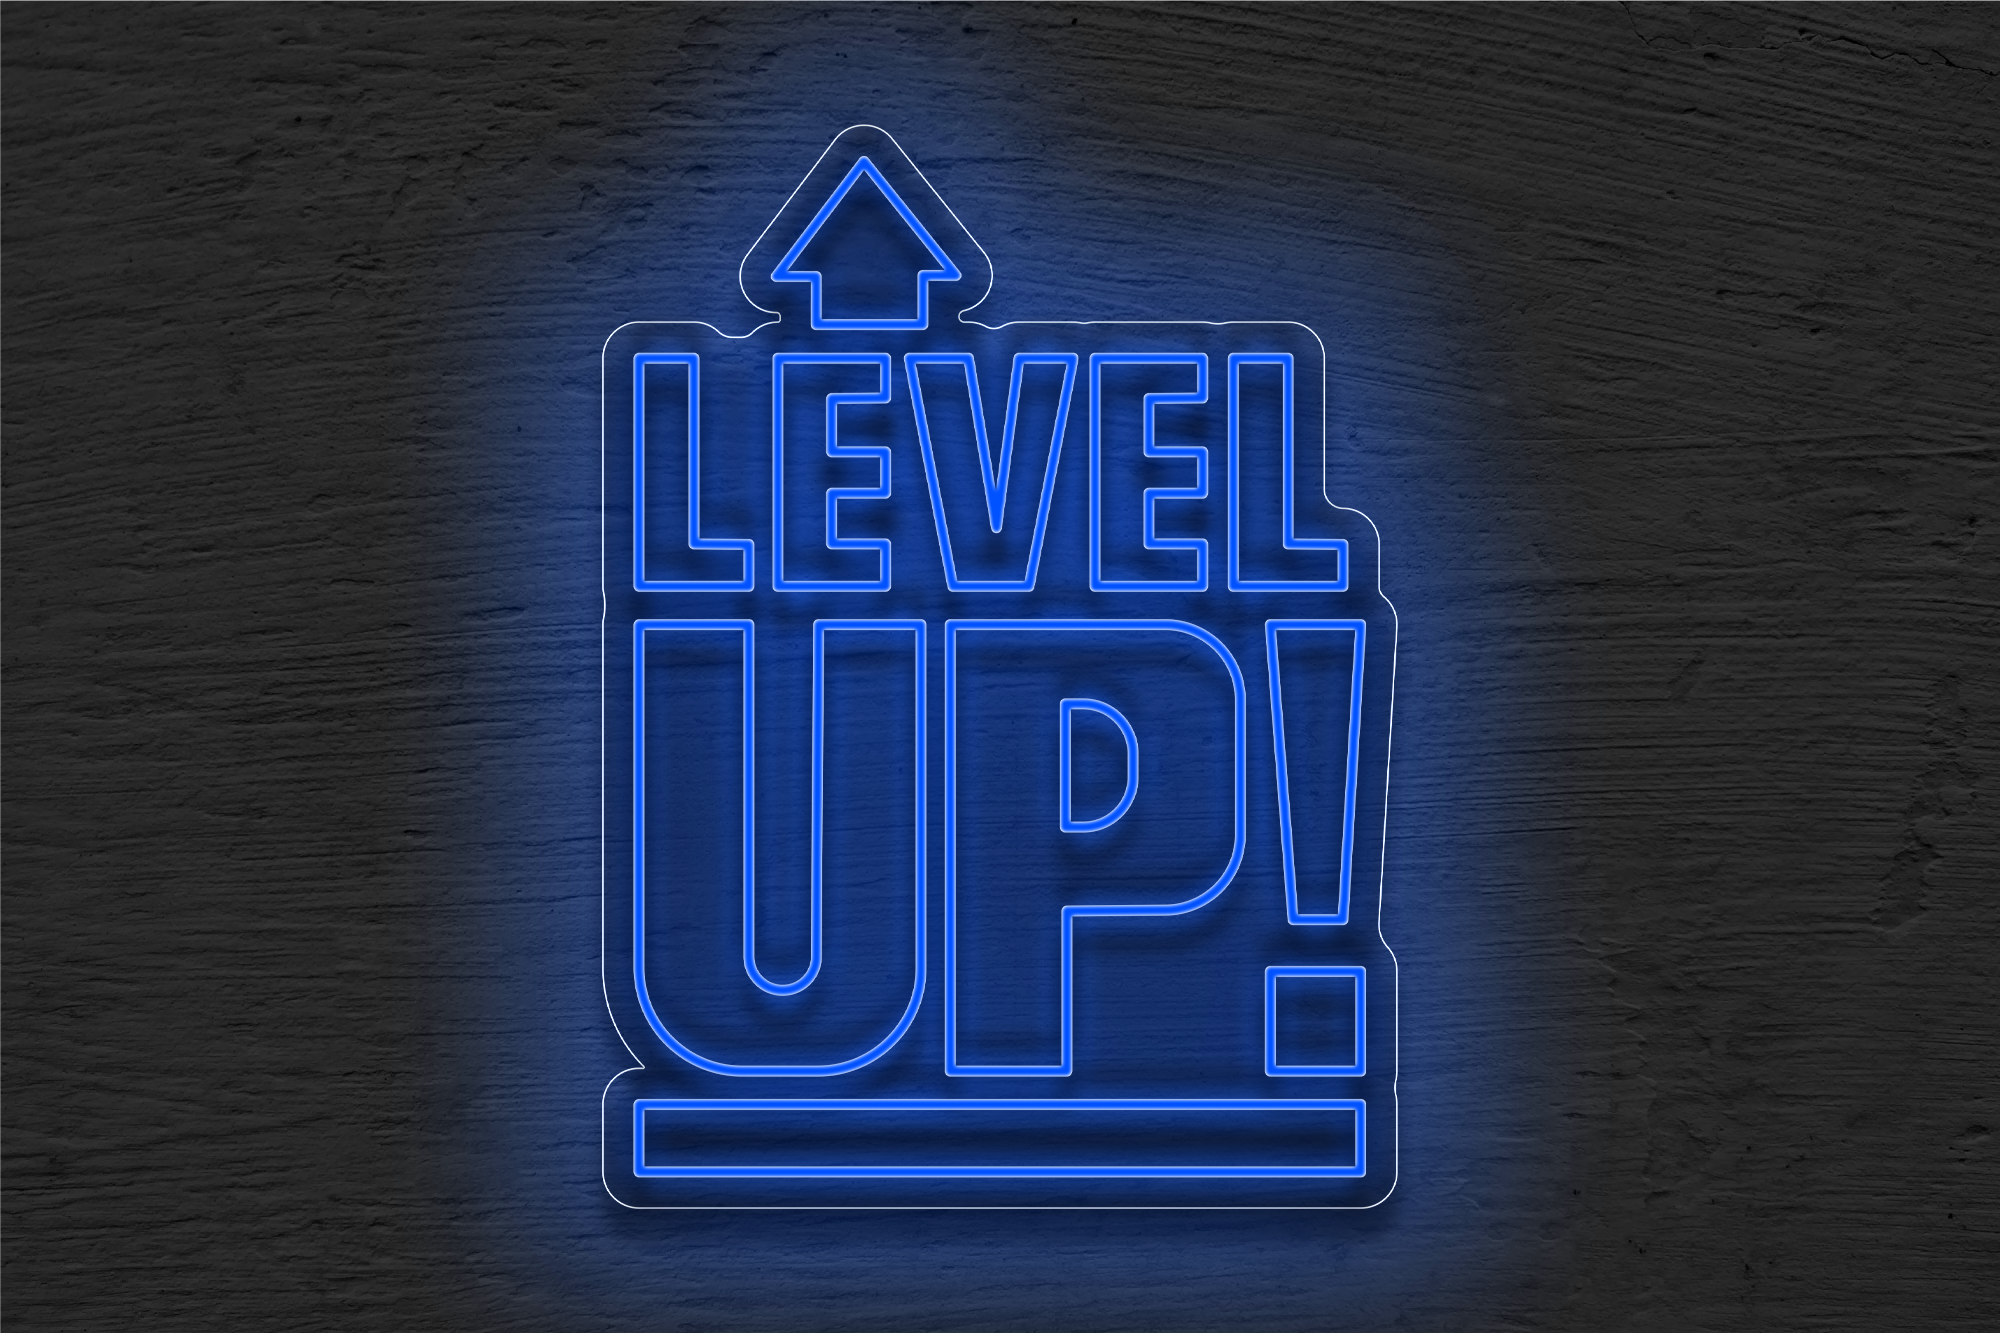 Double Stroke "Level UP!" with Arrow on Top LED Neon Sign